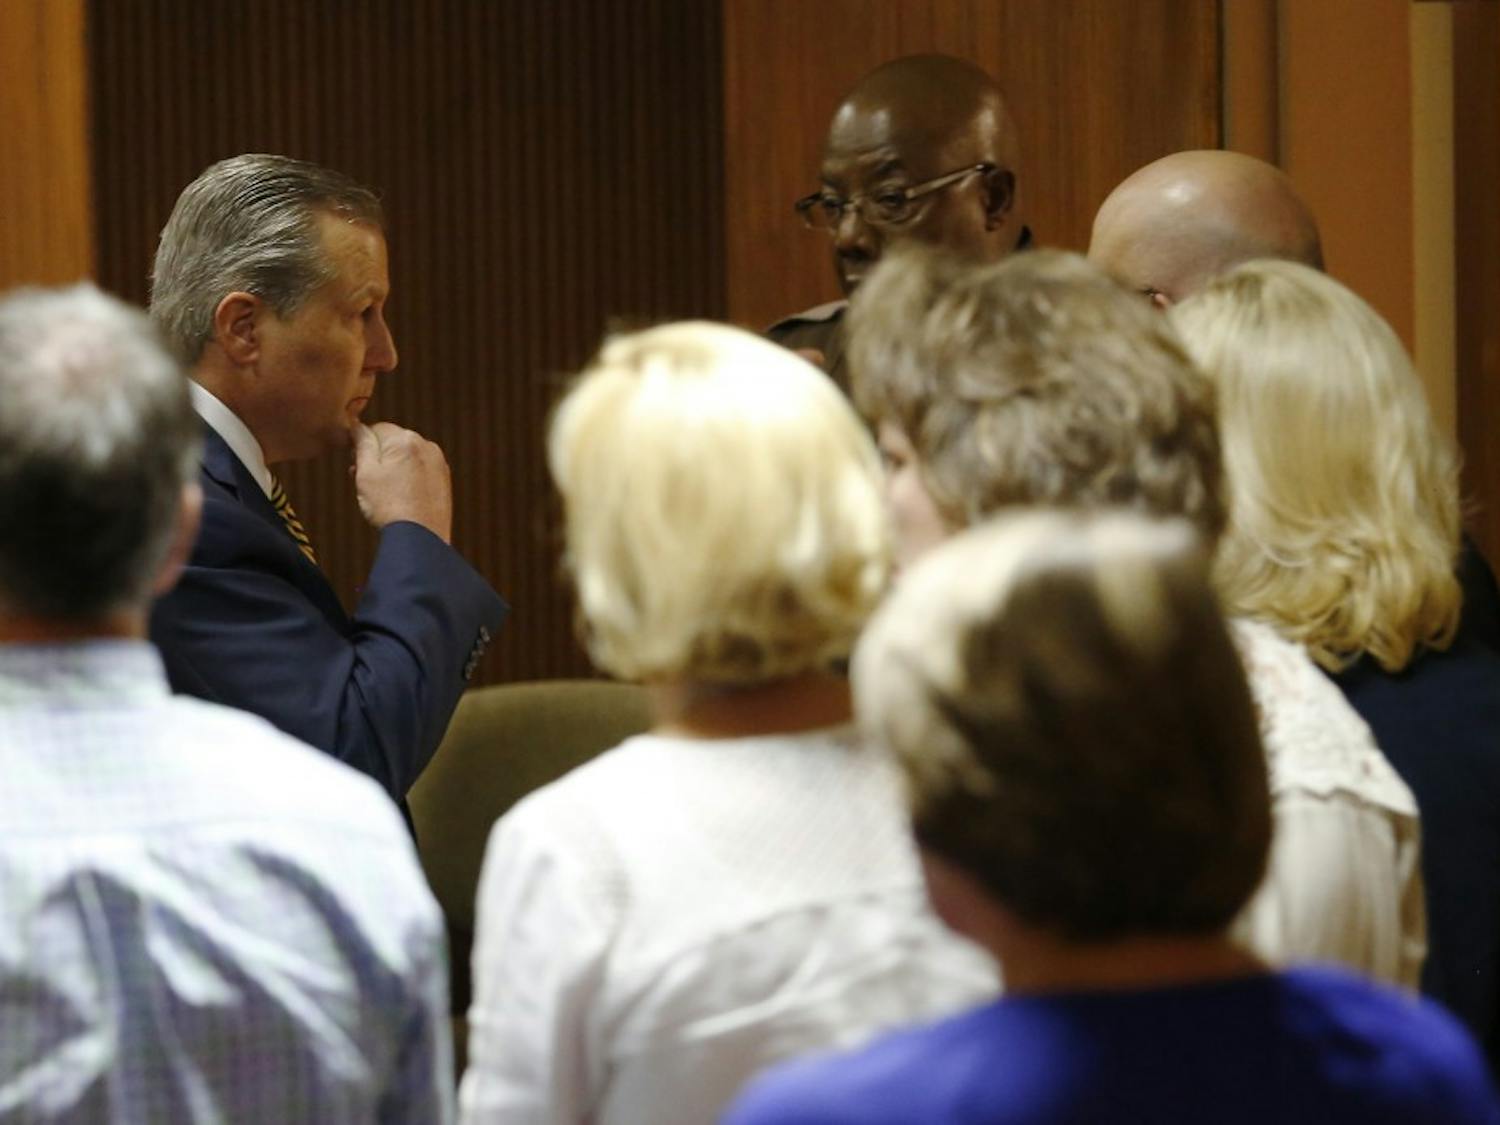 Mike Hubbard looks over at his wife Susan Hubbard while Lee County sheriffs deputies wait to take Hubbard into custody after found guilty on 12 of 23 counts on Friday, June 10, 2016  in Opelika, Ala. 
Todd J. Van Emst/Opelika-Auburn News/Pool